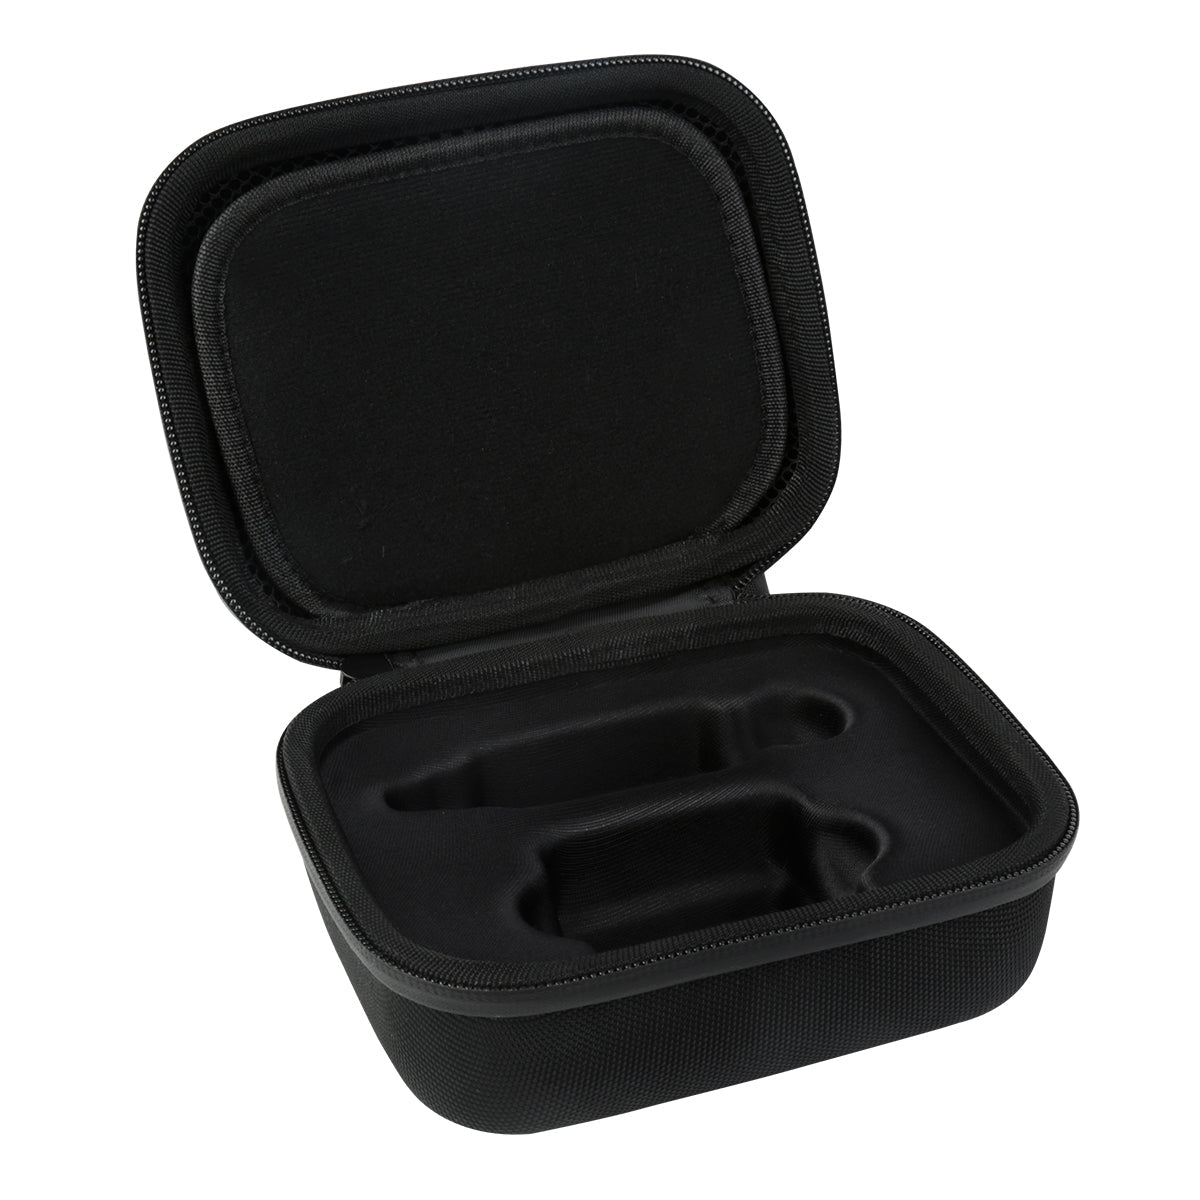 Xvive Travel Case for U4 In-Ear Monitor Wireless System, Travel Case for sale at Richards Guitars.